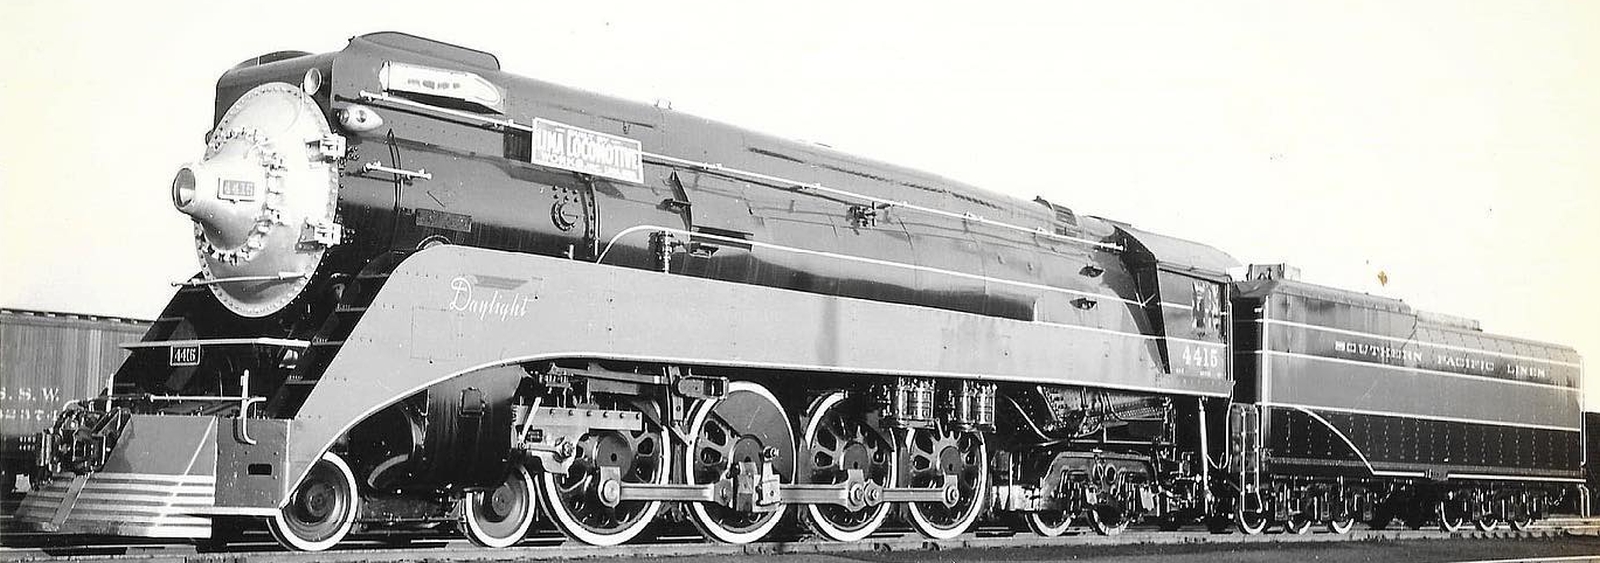 GS-2 Nr. 4415 in January 1937 in East St. Louis, Illinois